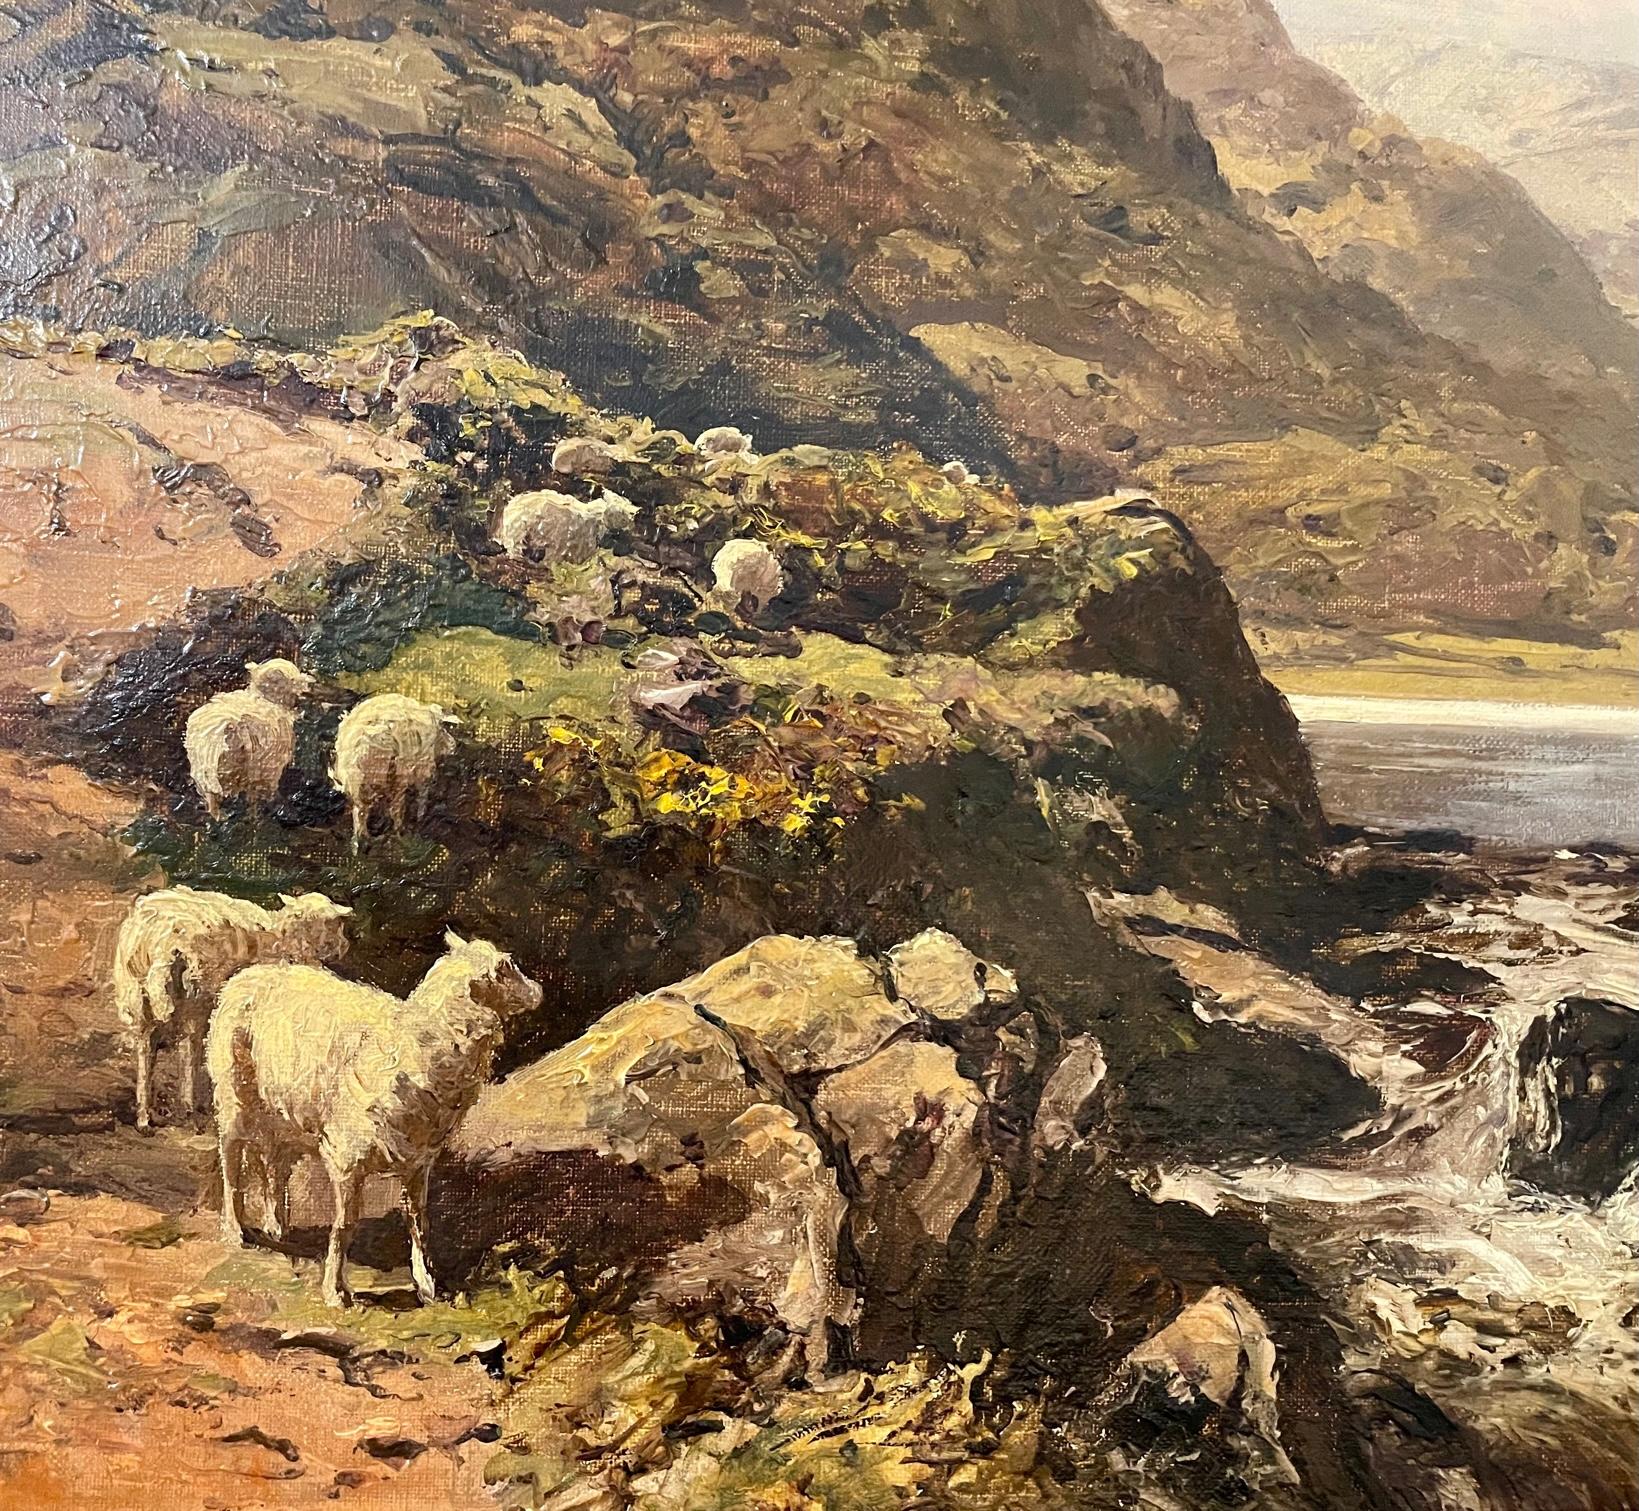 Fine landscape painting, oil on canvas of Snowdonia Wales by 19th century British artist Thomas Huson.  Signed by artist in lower left, Thomas Huson RI (Royal Institute of Oil Painters, elected 1883). This painting would then date from 1883, later